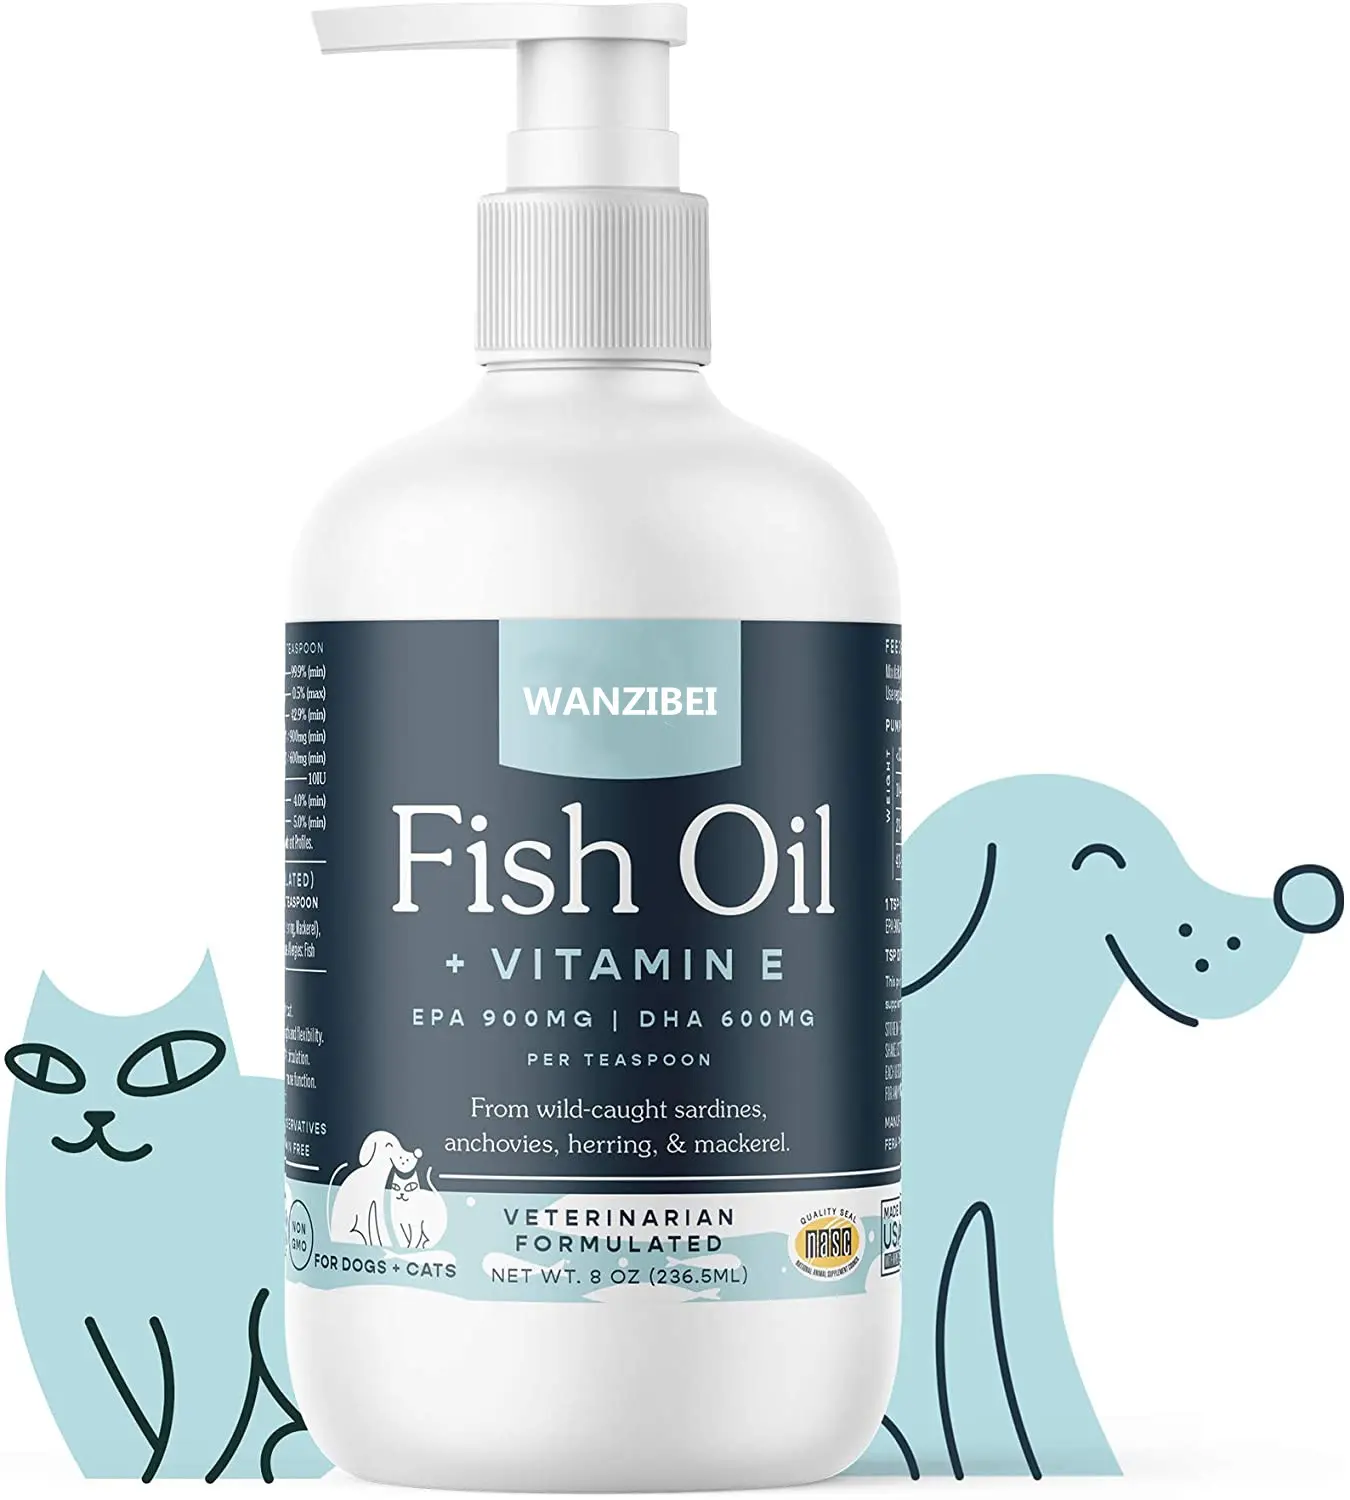 Wild Alaskan Salmon Oil for Dogs - Omega-3 for Dogs - Pet Liquid Food Supplement - Hip and joint supplement for dogs